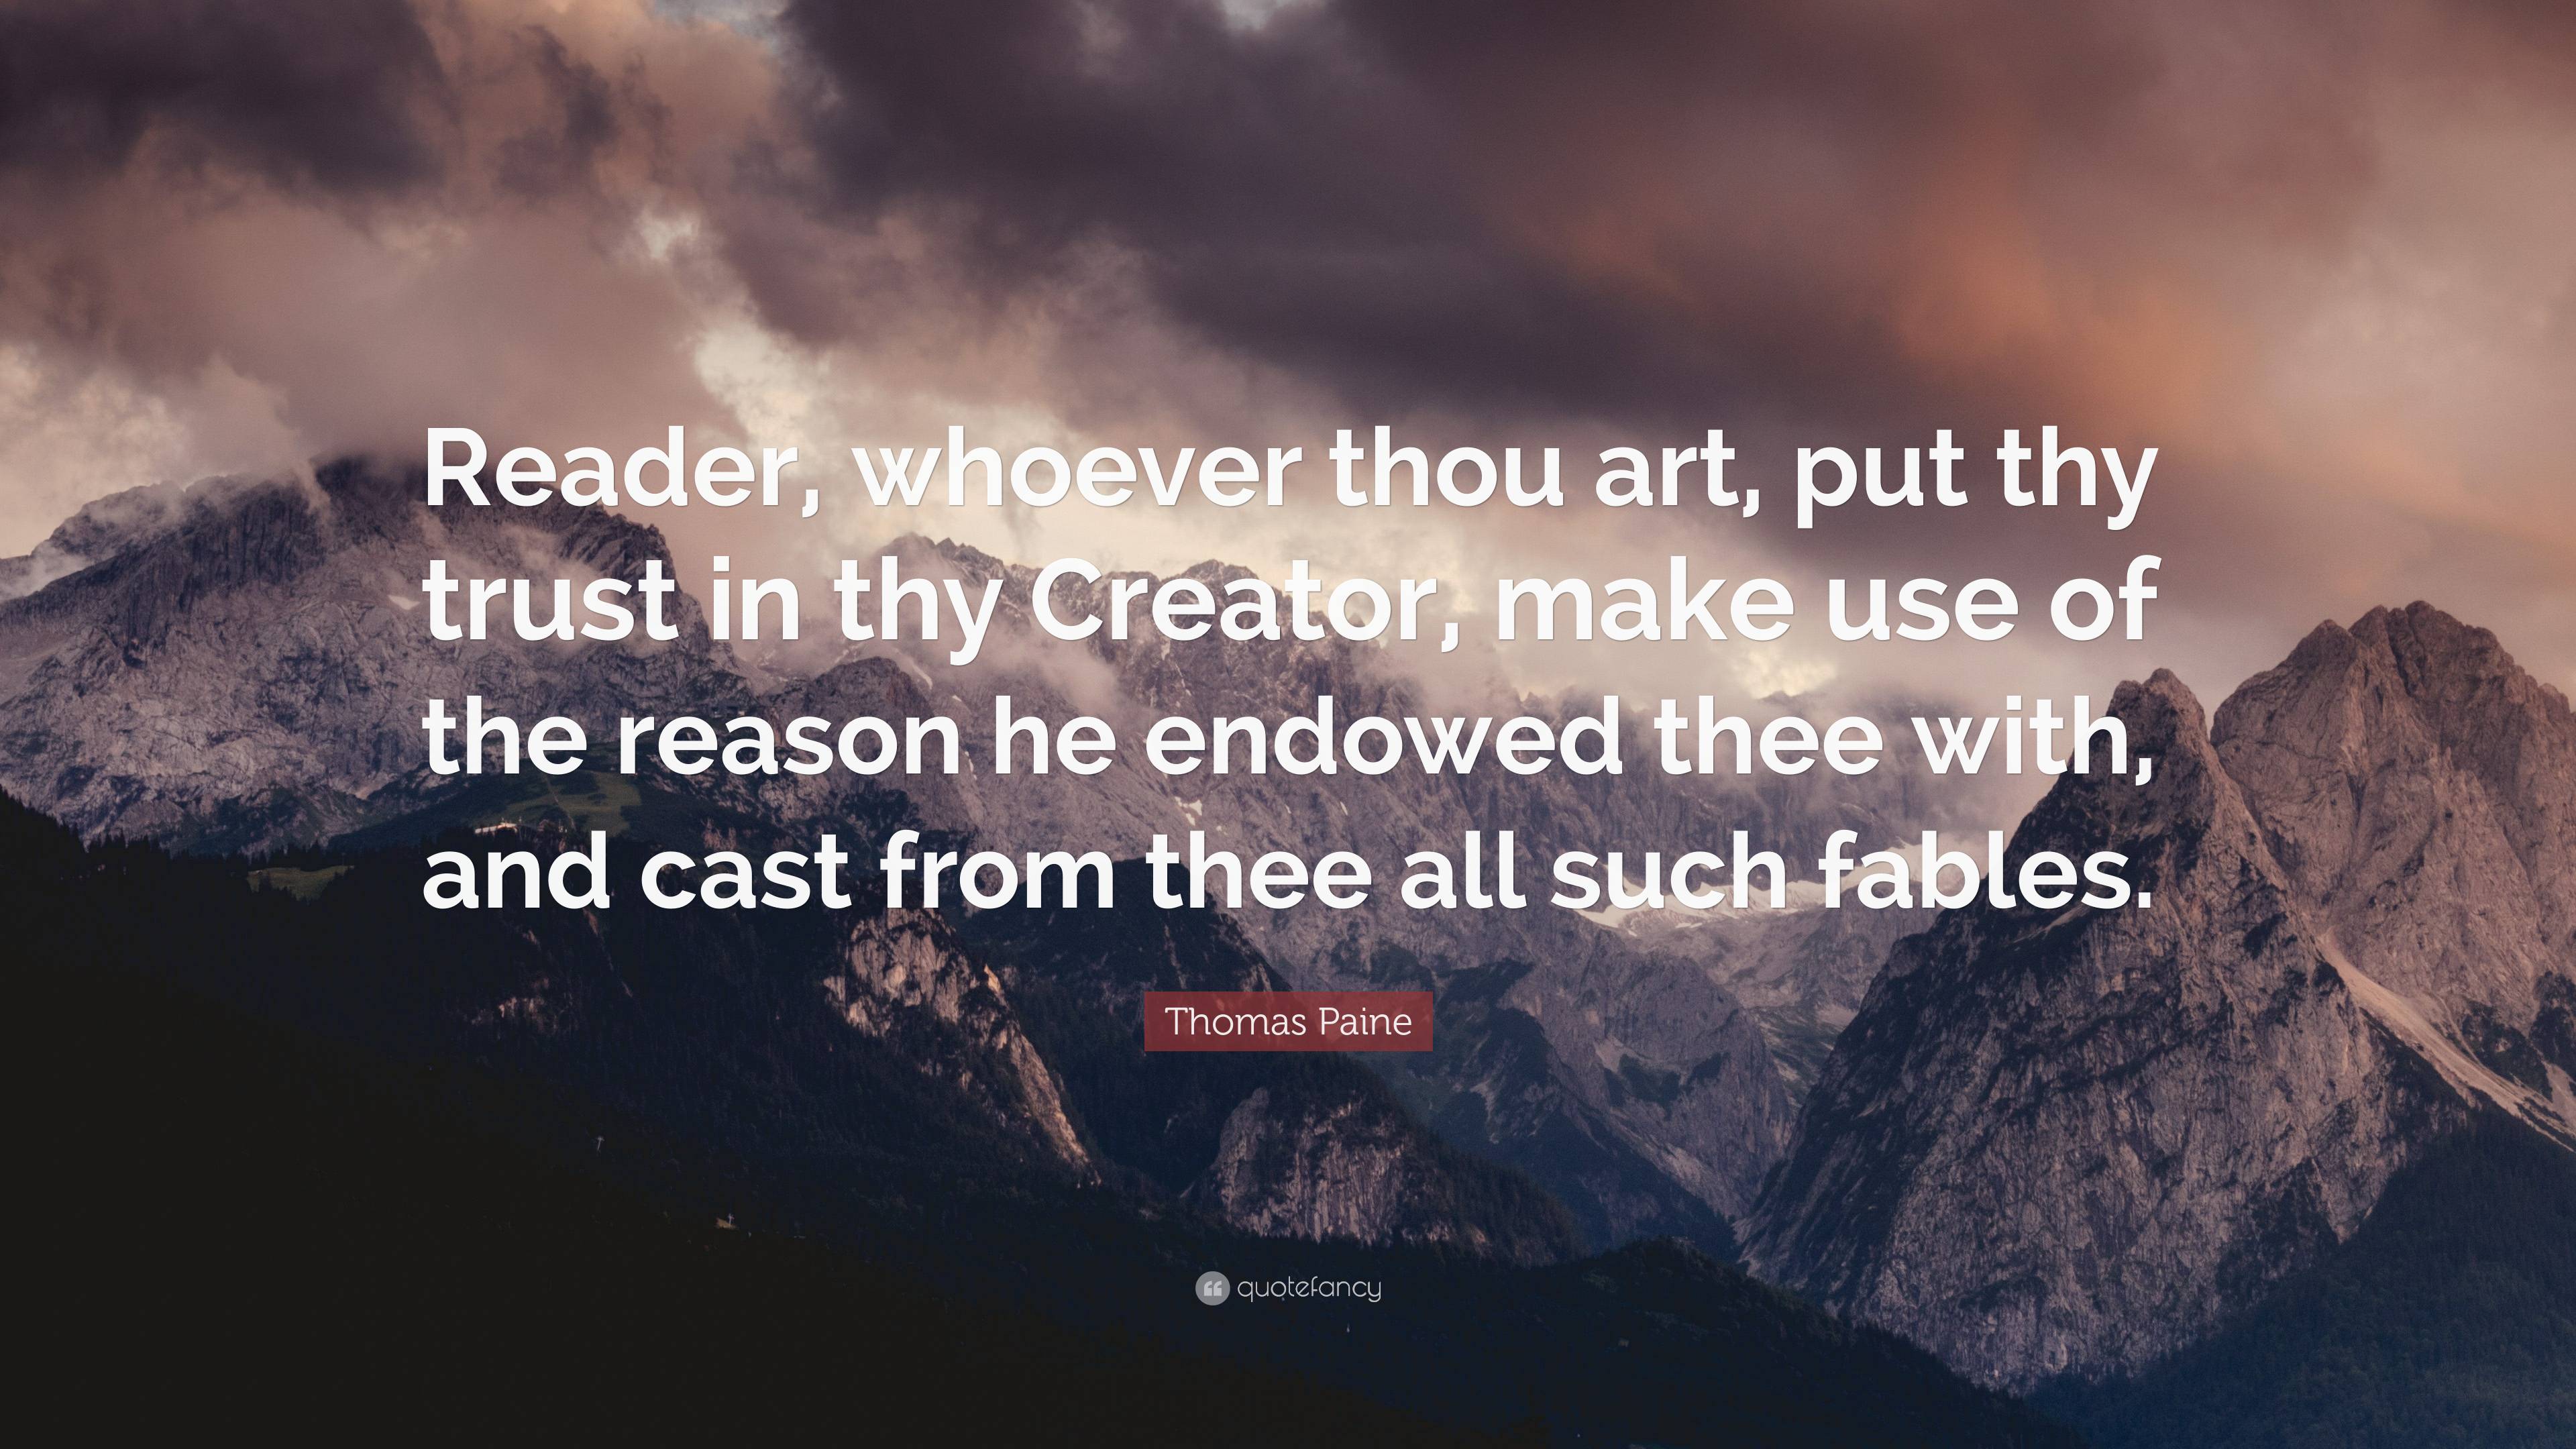 Thomas Paine Quote: “Reader, whoever thou art, put thy trust in thy ...